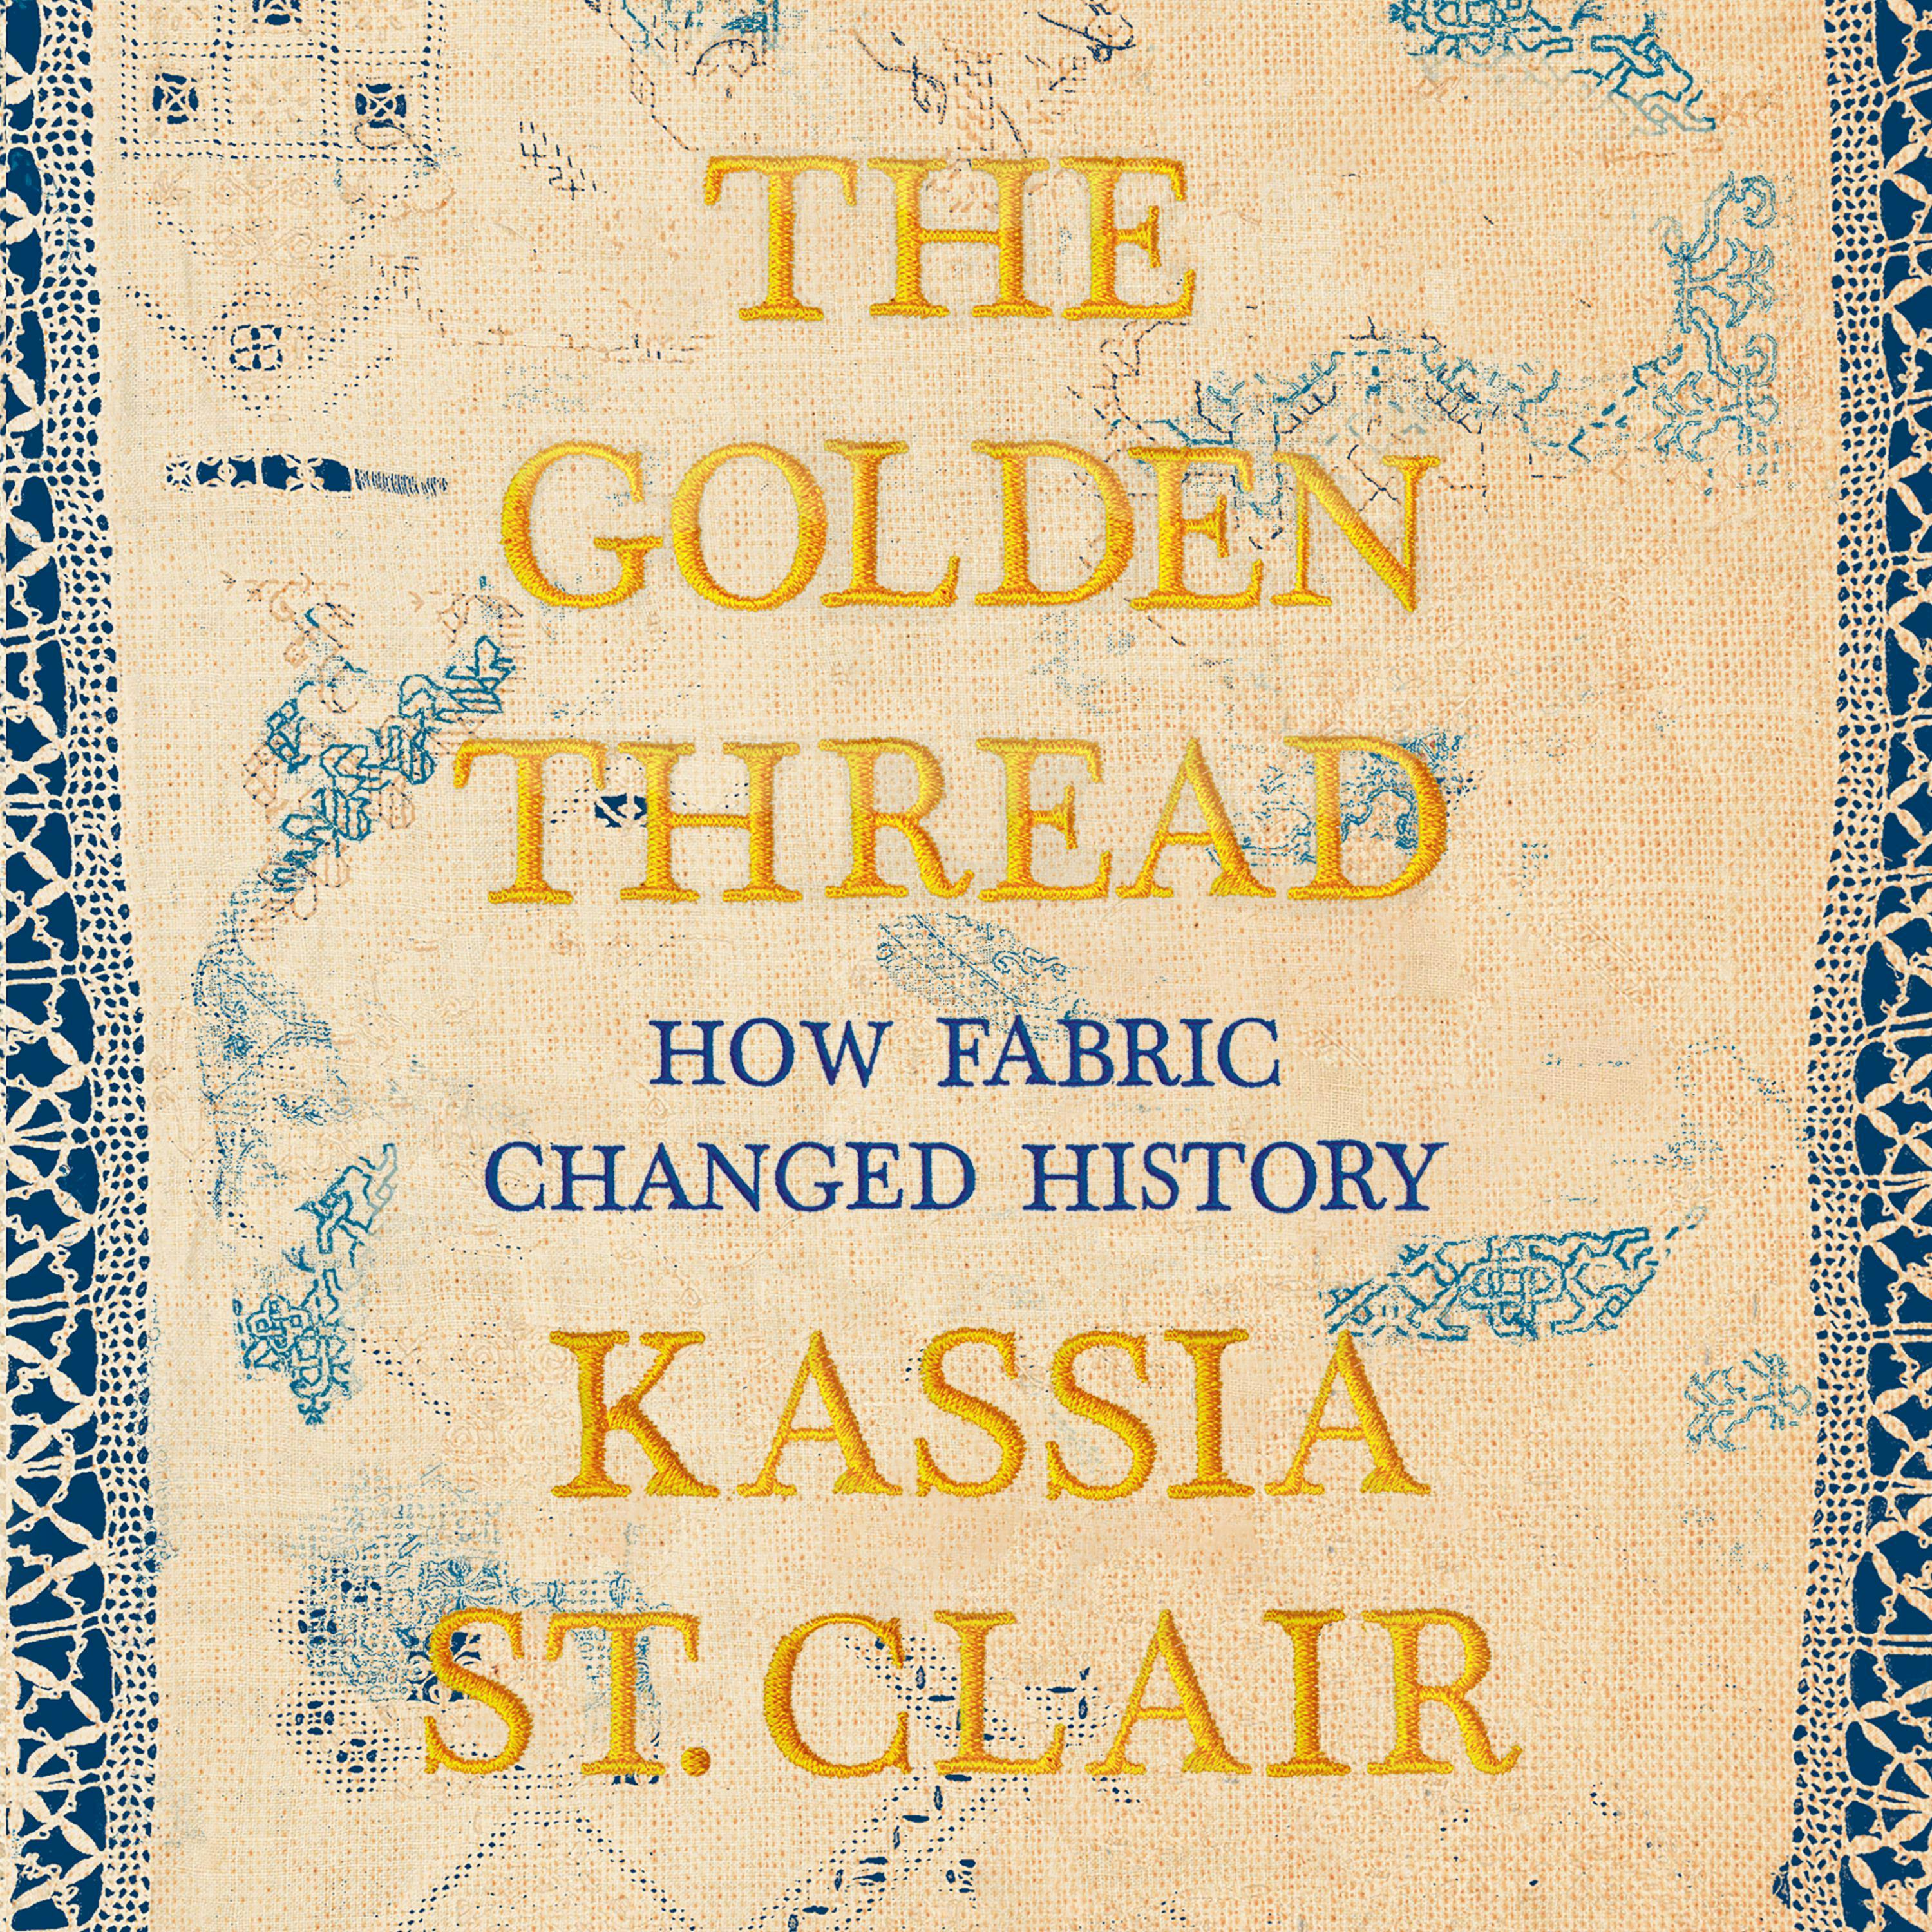 The Golden Thread: How Fabric Changed History - Kassia St. Clair